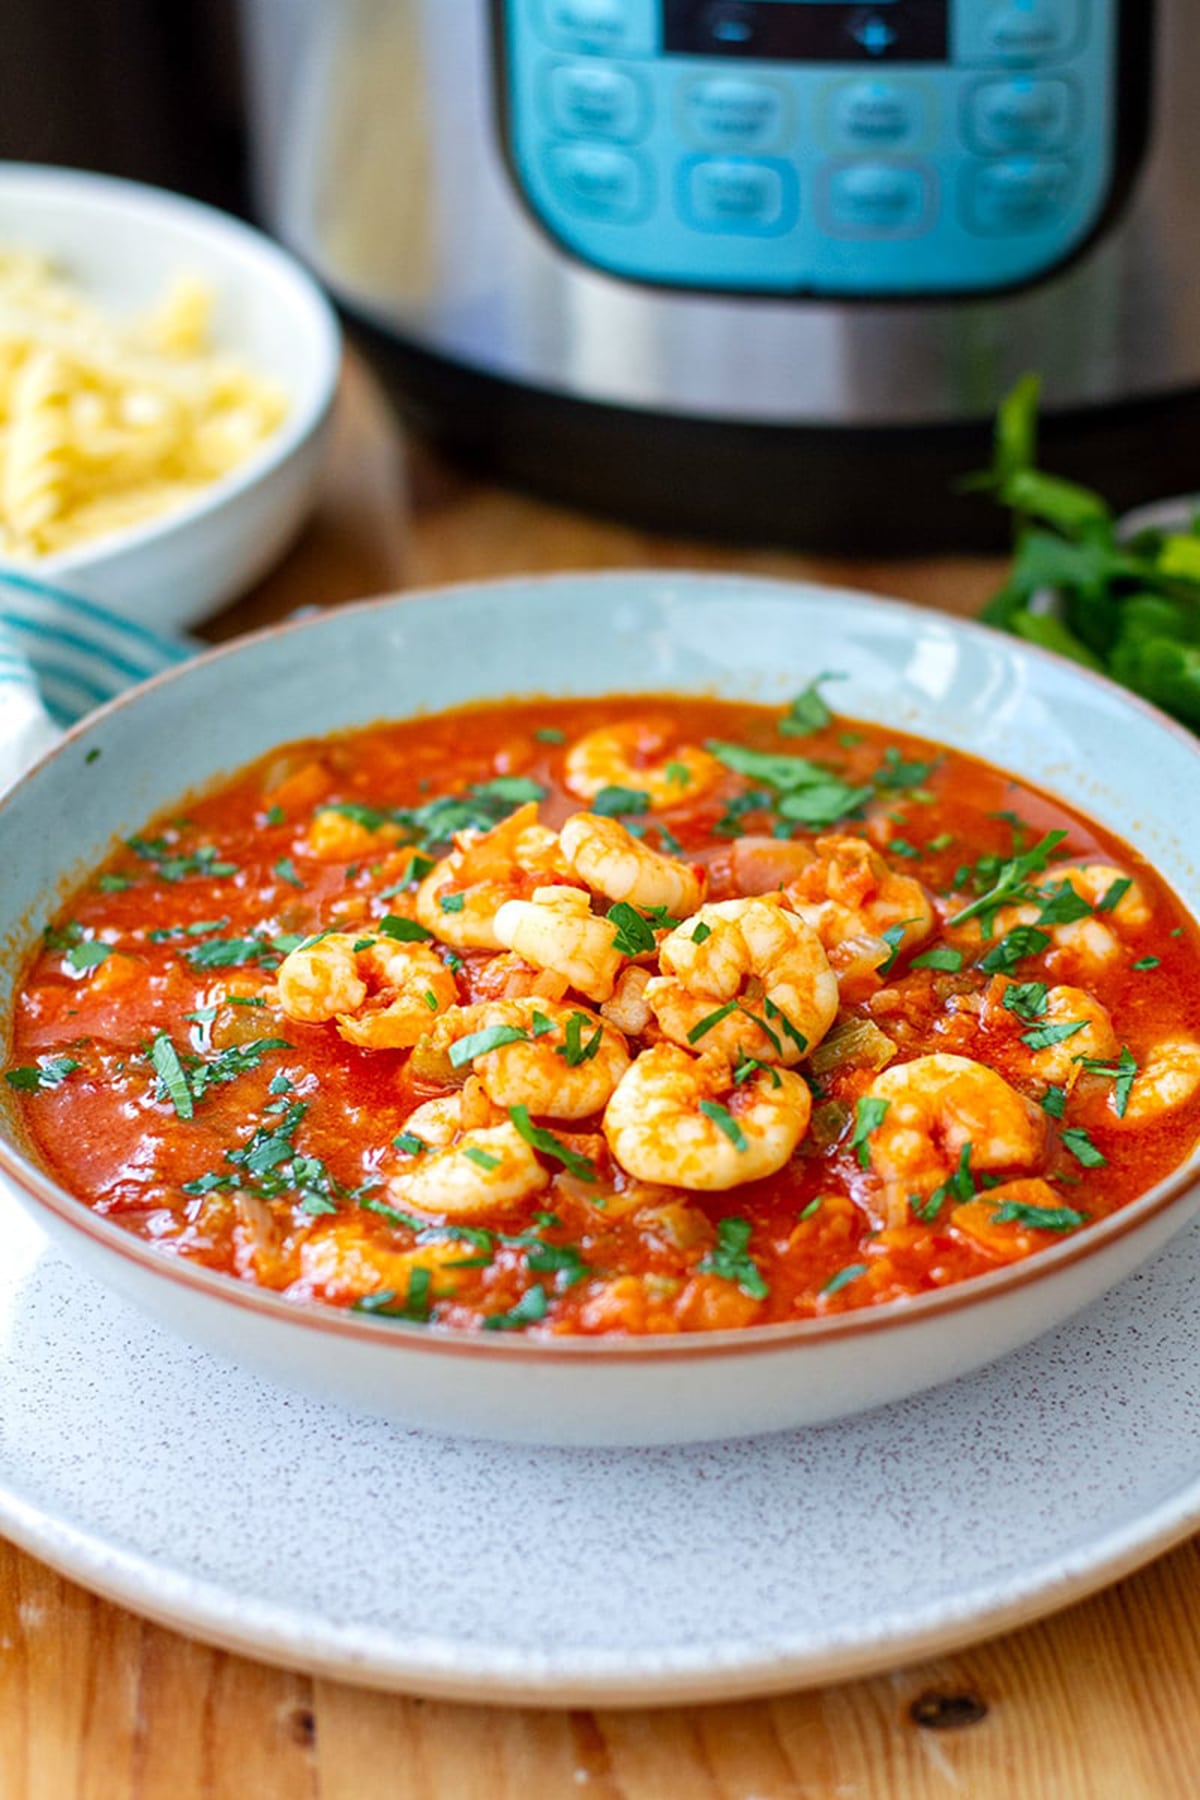 Shrimp With Tomato & Garlic (From Frozen)